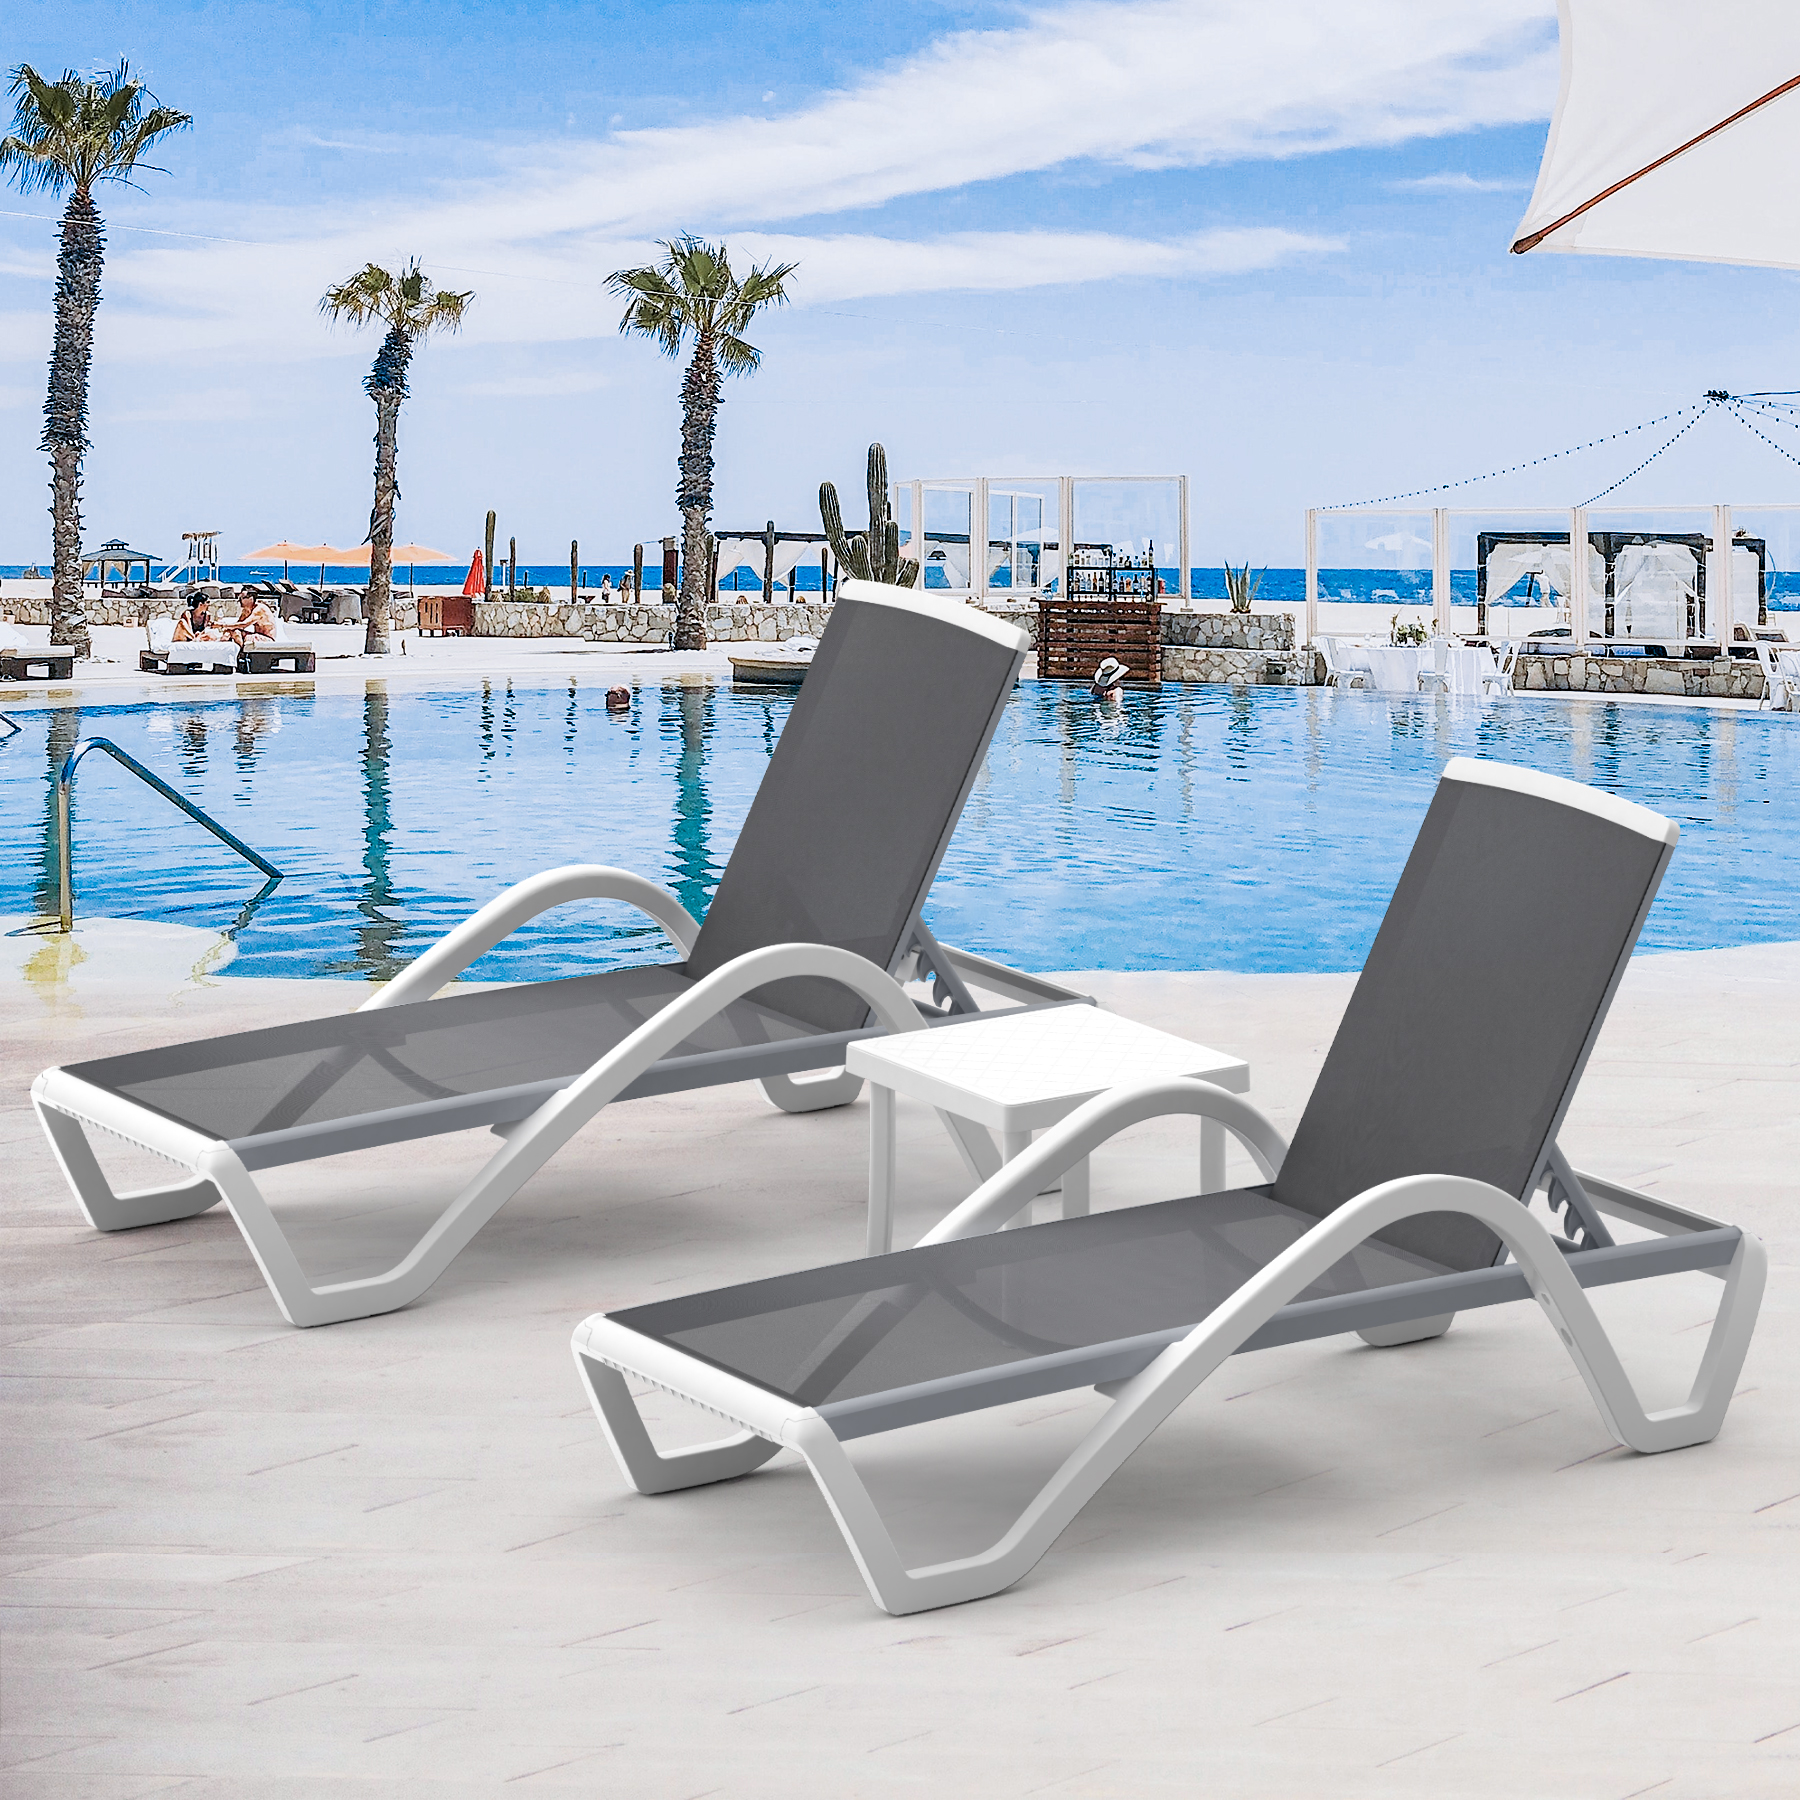 Domi Patio Chaise Lounge Chair Set of 3,Outdoor Aluminum Polypropylene Sunbathing Chair with Adjustable Backrest,Arm,Side Table,for Beach,Yard,Balcony,Poolside(2 Gray Chairs W/Table) - image 1 of 8